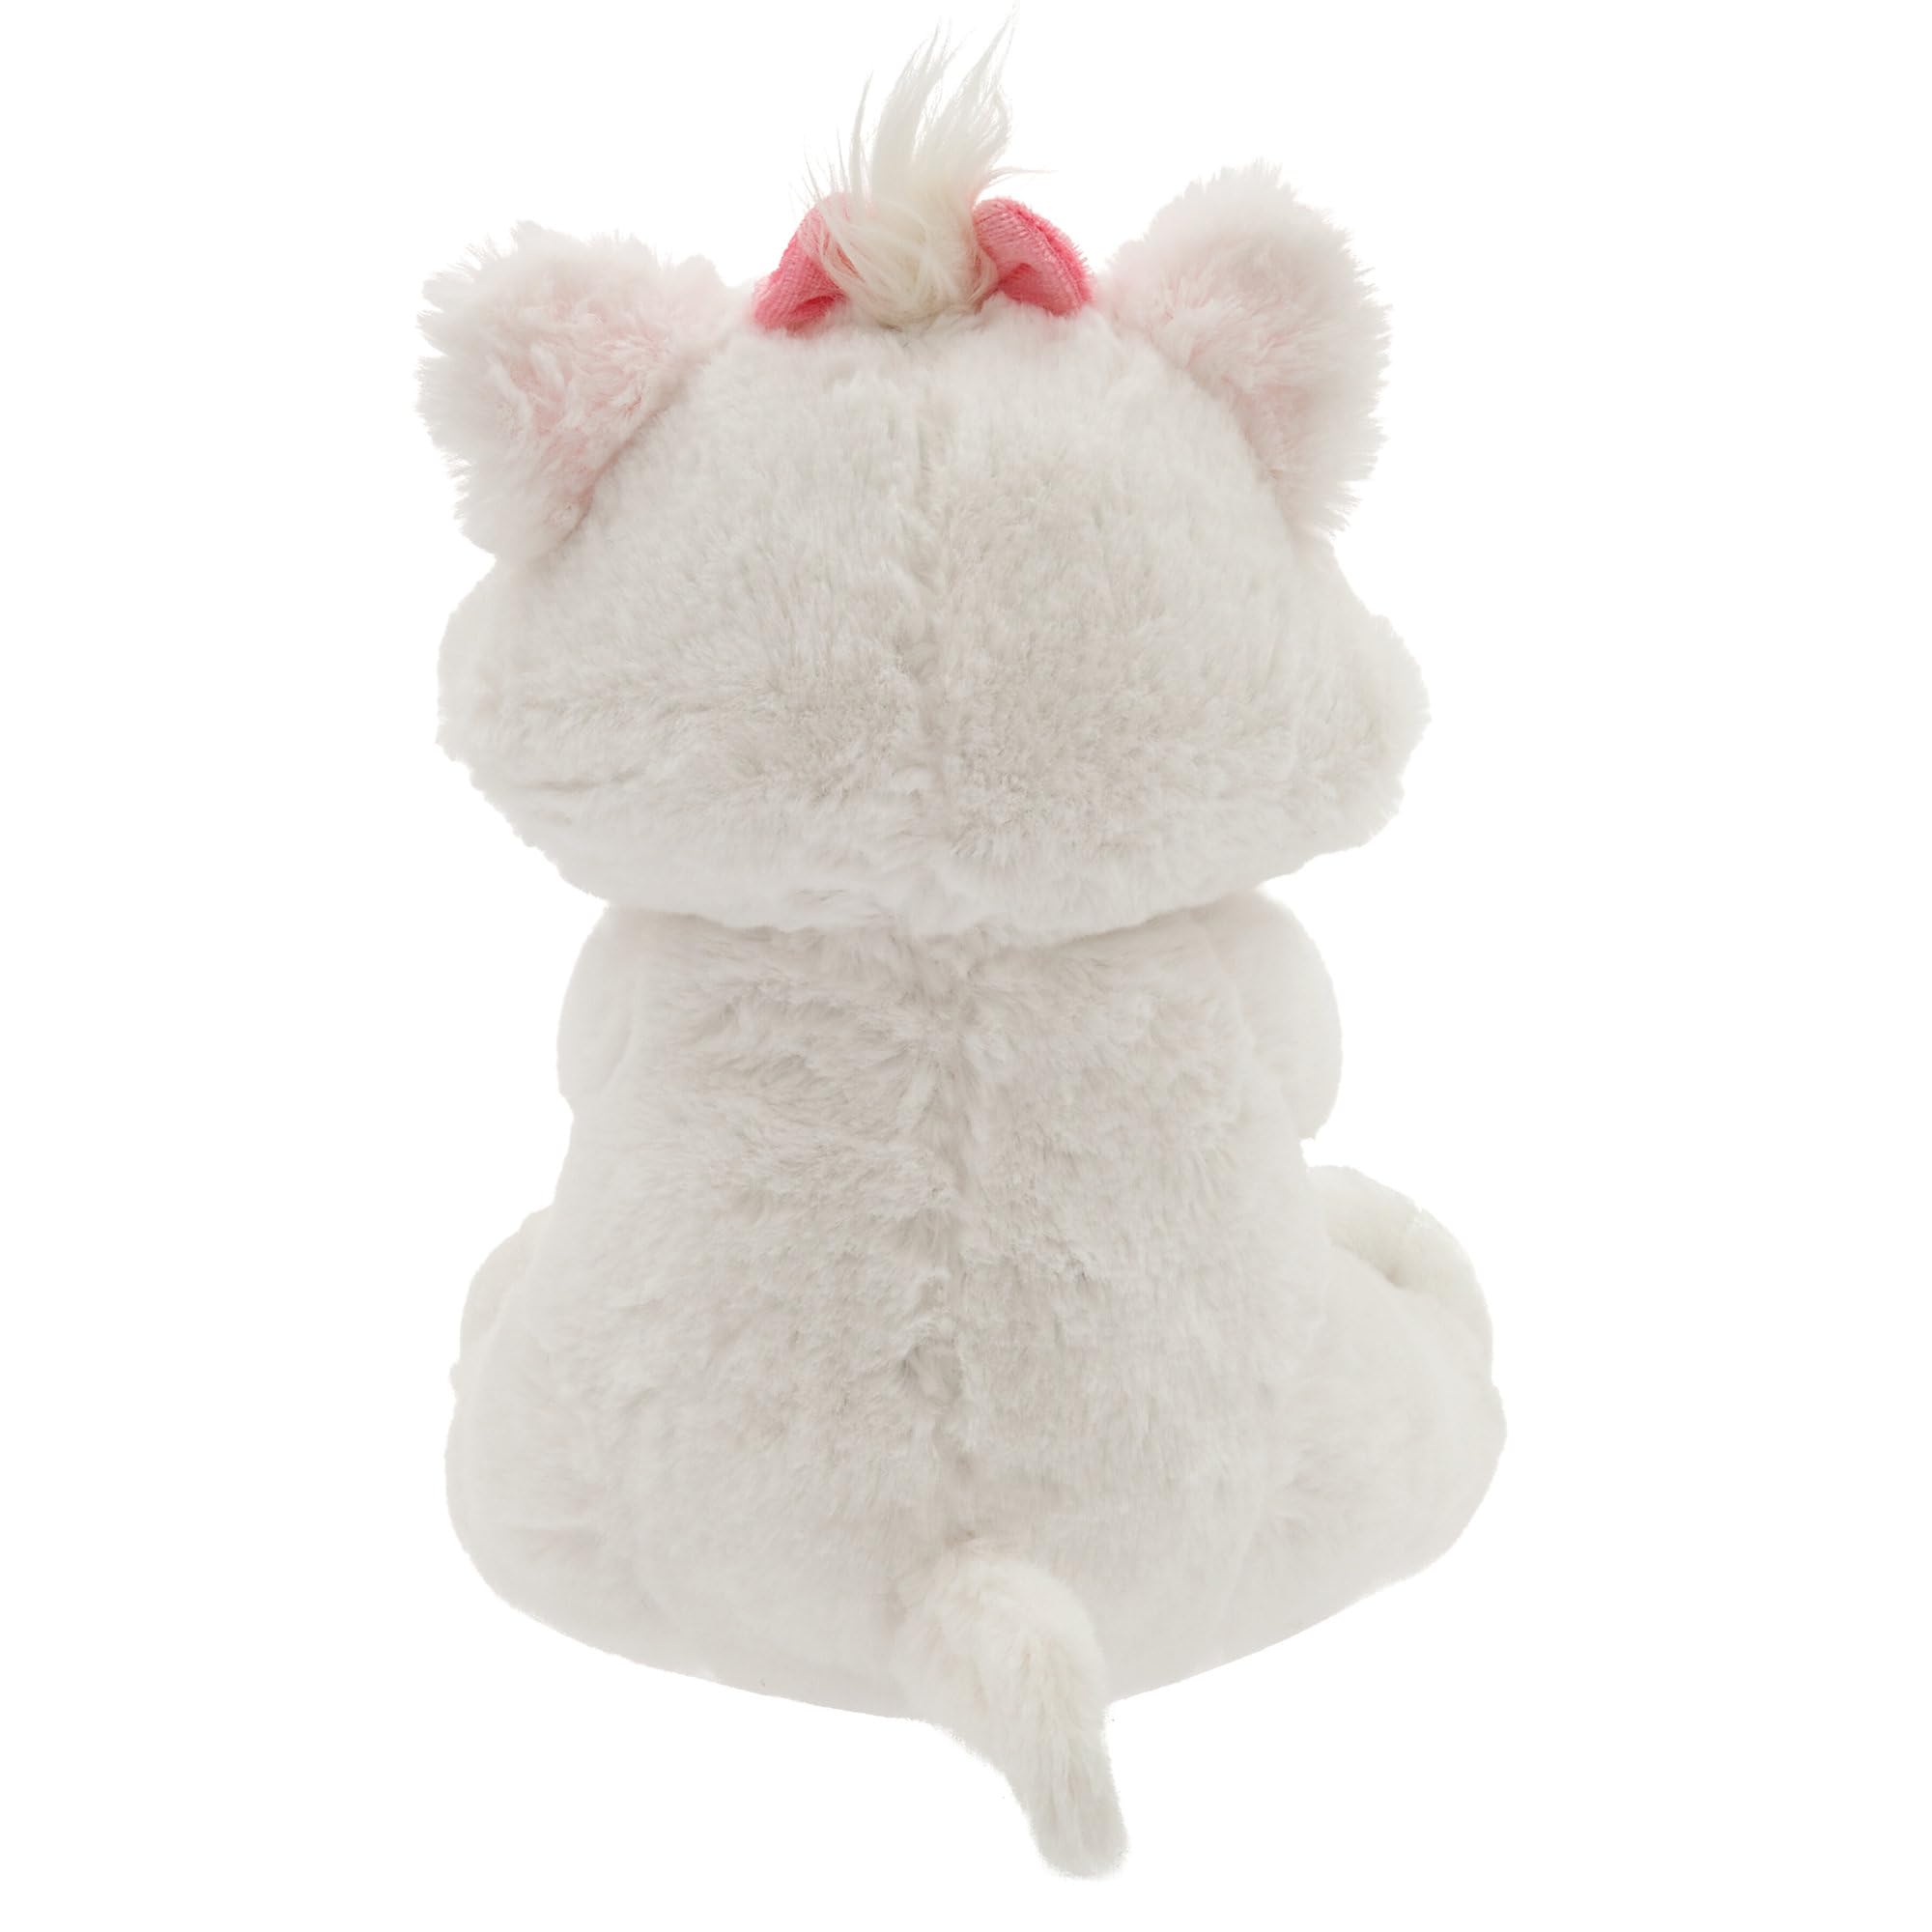 Disney Store Official Babies Collection: 10-Inch Marie from The Aristocats Plush in Swaddle - Official Soft Toy - Perfect for Fans & Kids